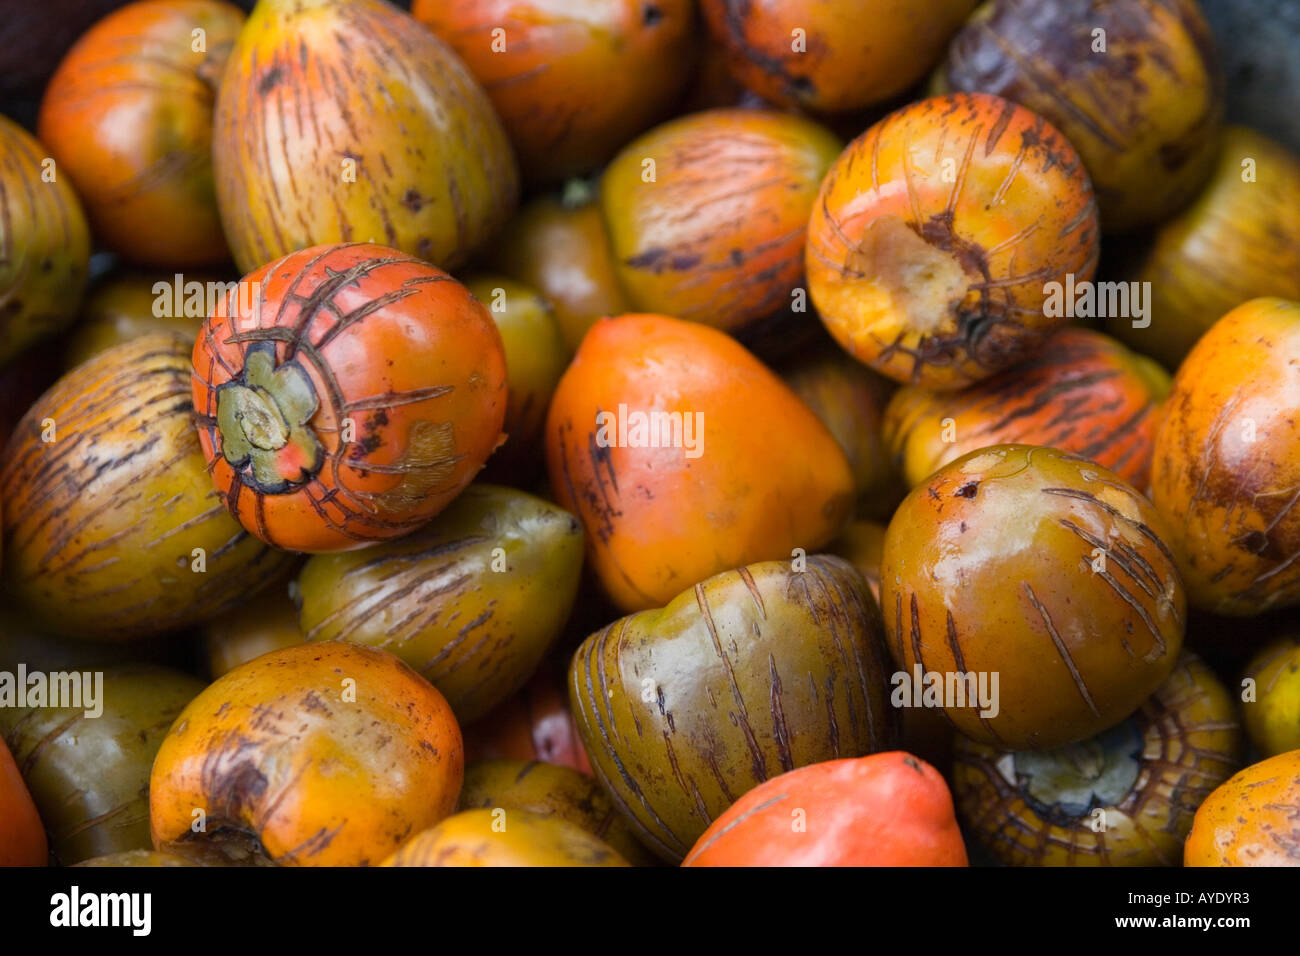 Bactris gasipaes K for sale at a road side market in Alajuela, Costa Rica, Central America Stock Photo